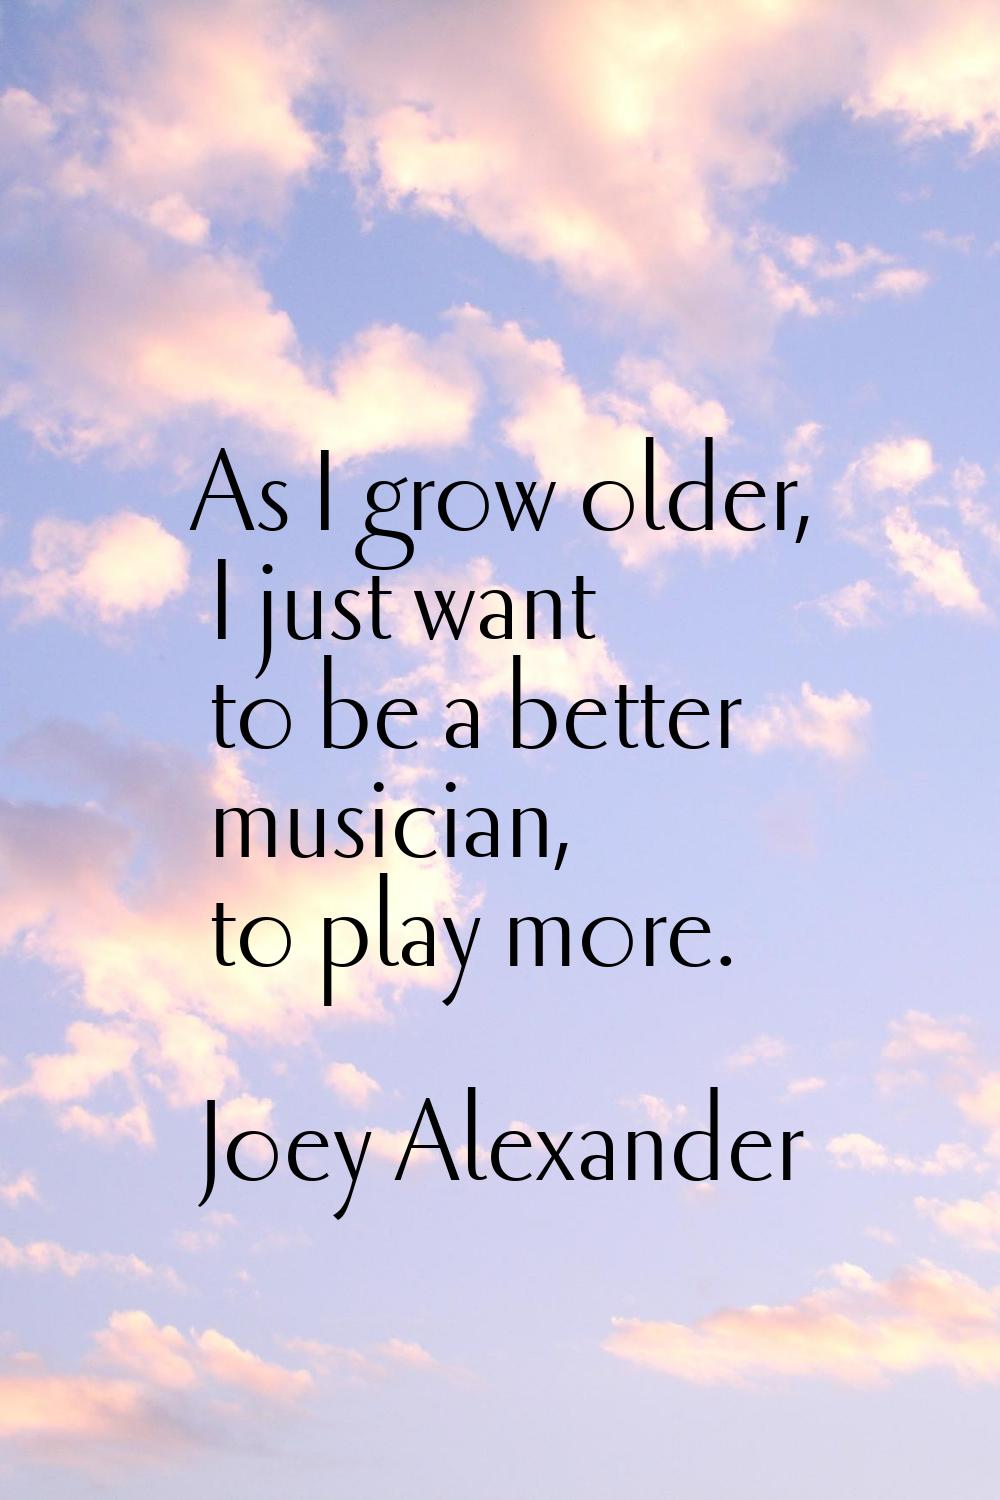 As I grow older, I just want to be a better musician, to play more.